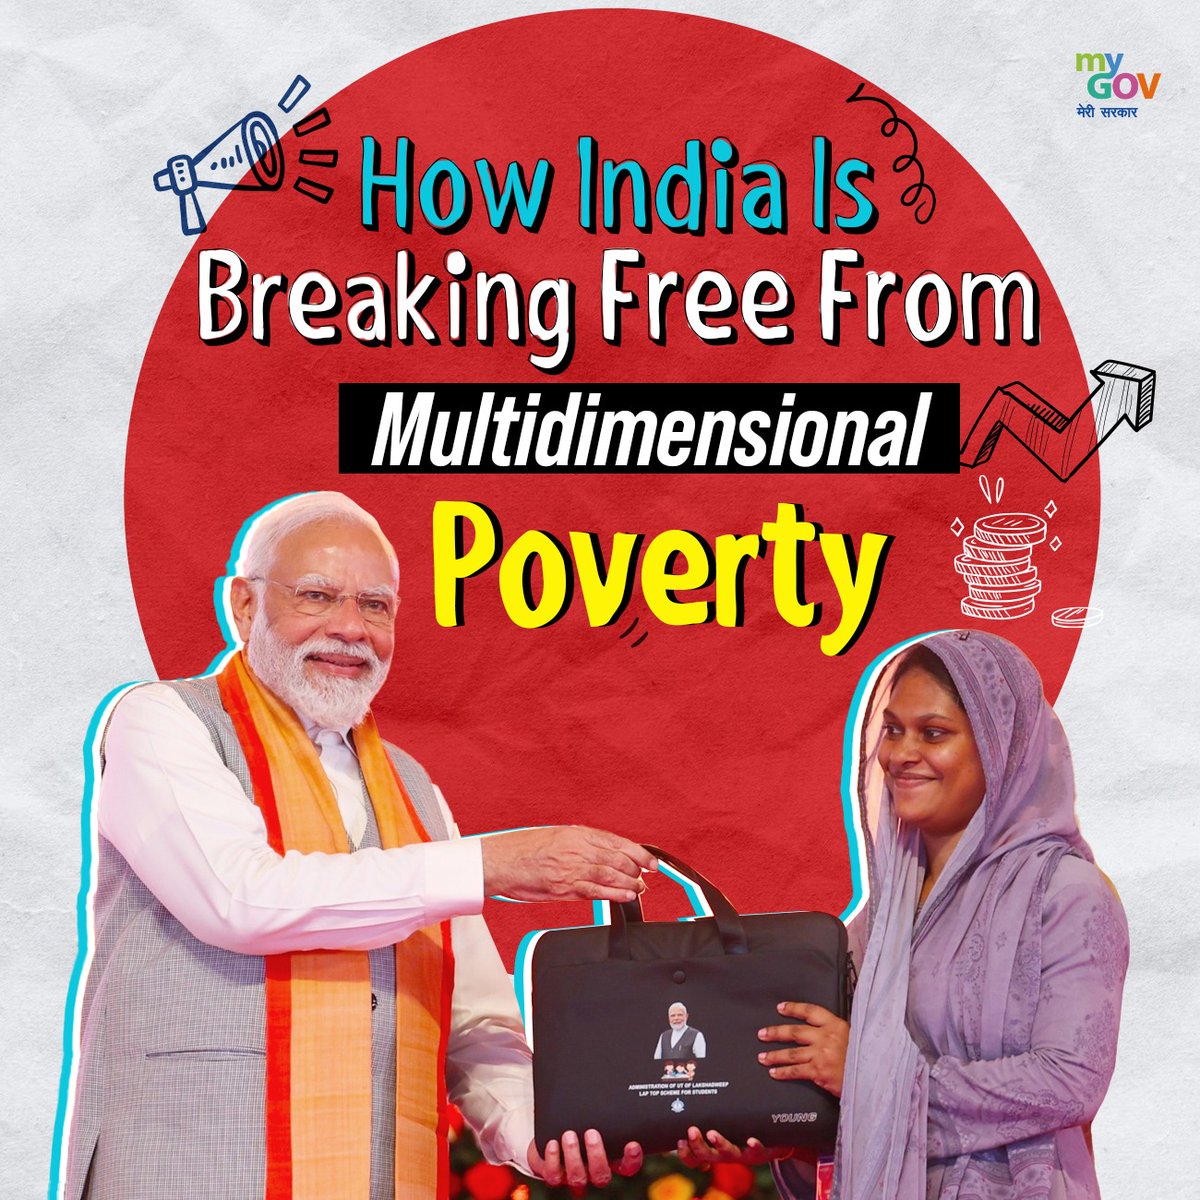 Under PM @narendramodi's leadership, India is breaking free from multidimensional poverty.

Dive into the thread to explore more about this transformative journey.

#PovertyReduction
#NewIndia
#PovertyFreeIndia